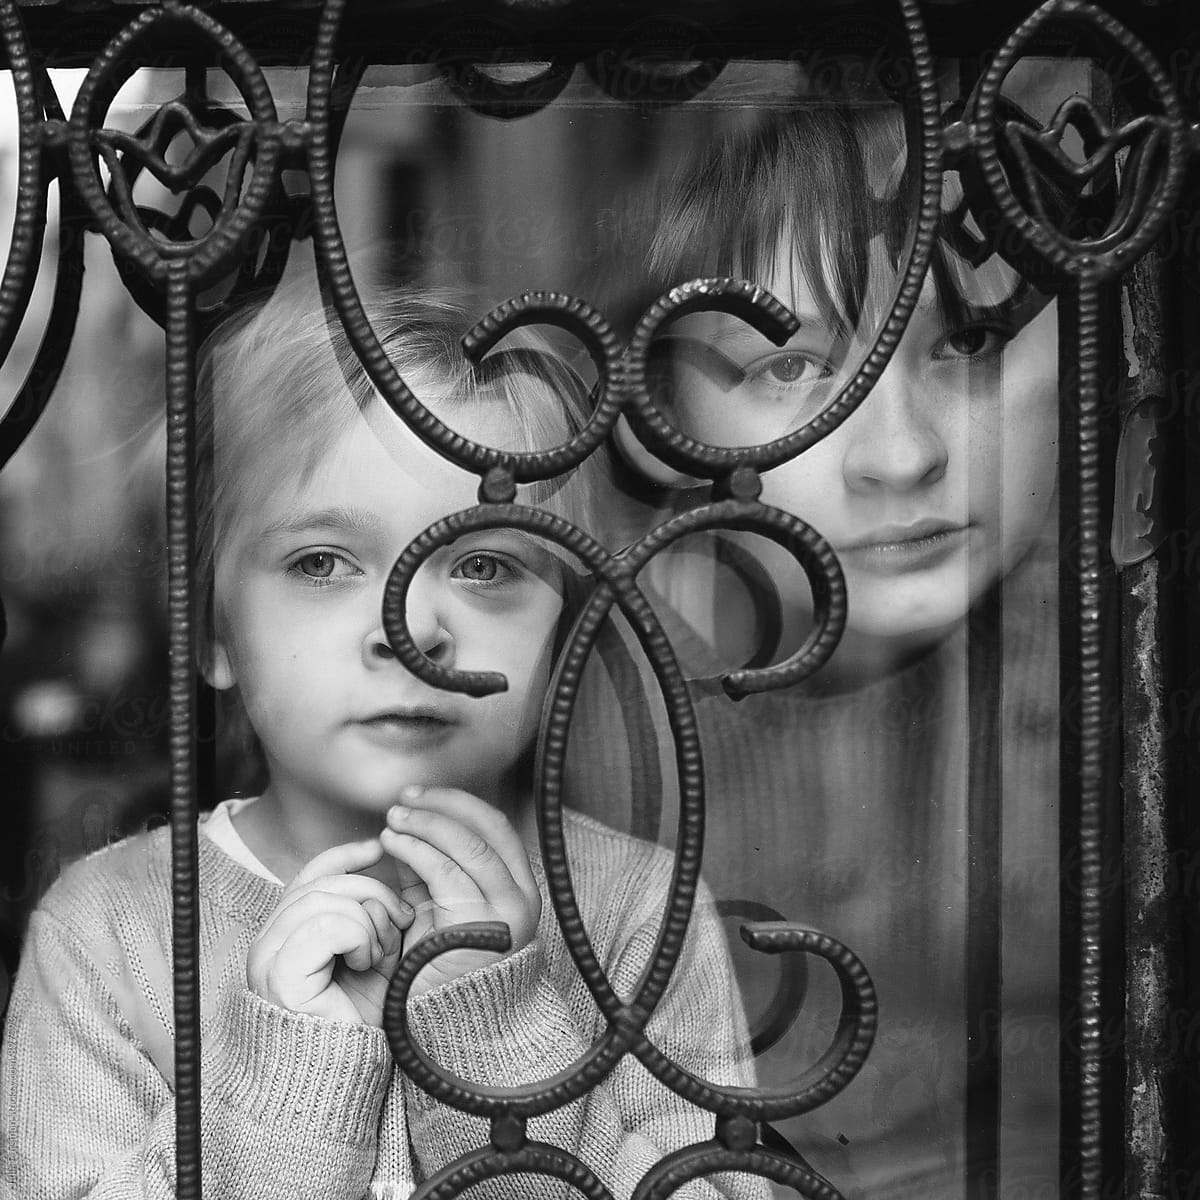 Two children look out of a window with ornate metal bars.